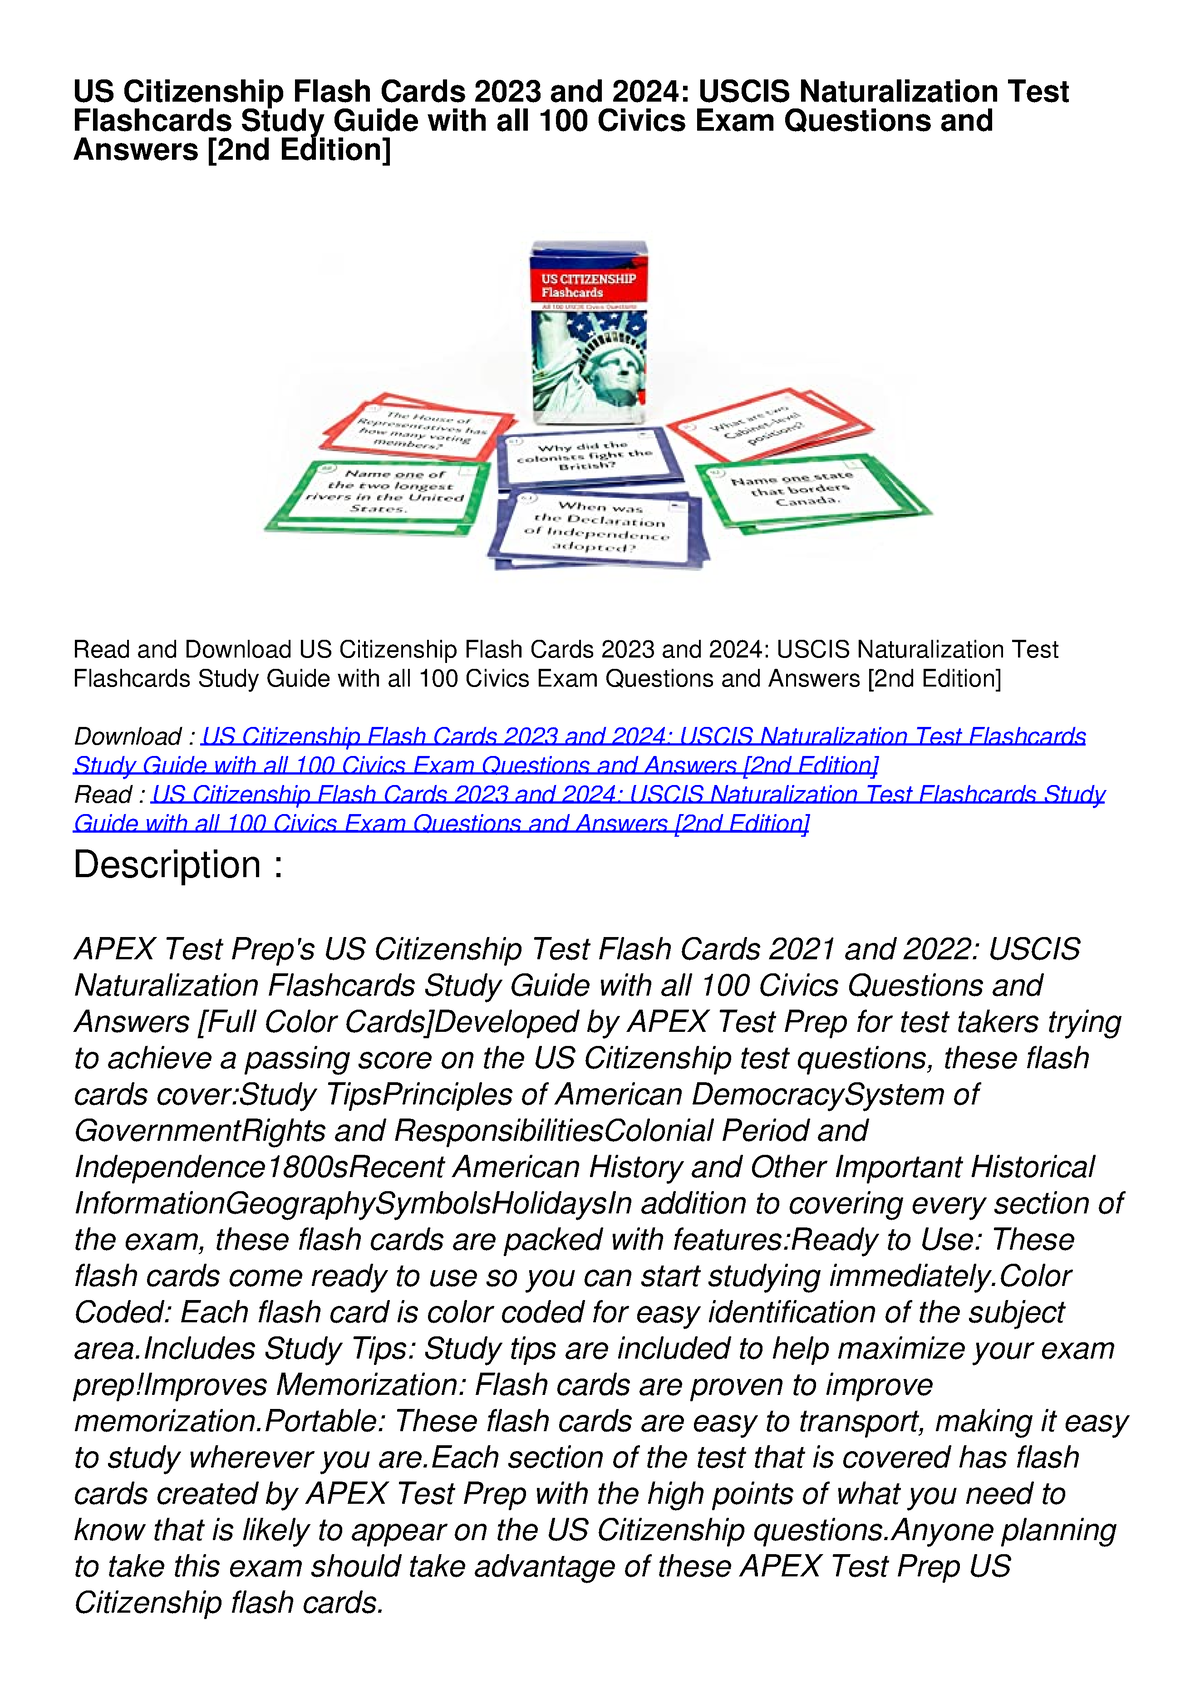 PDF/READ US Citizenship Flash Cards 2023 and 2024 USCIS Naturalization